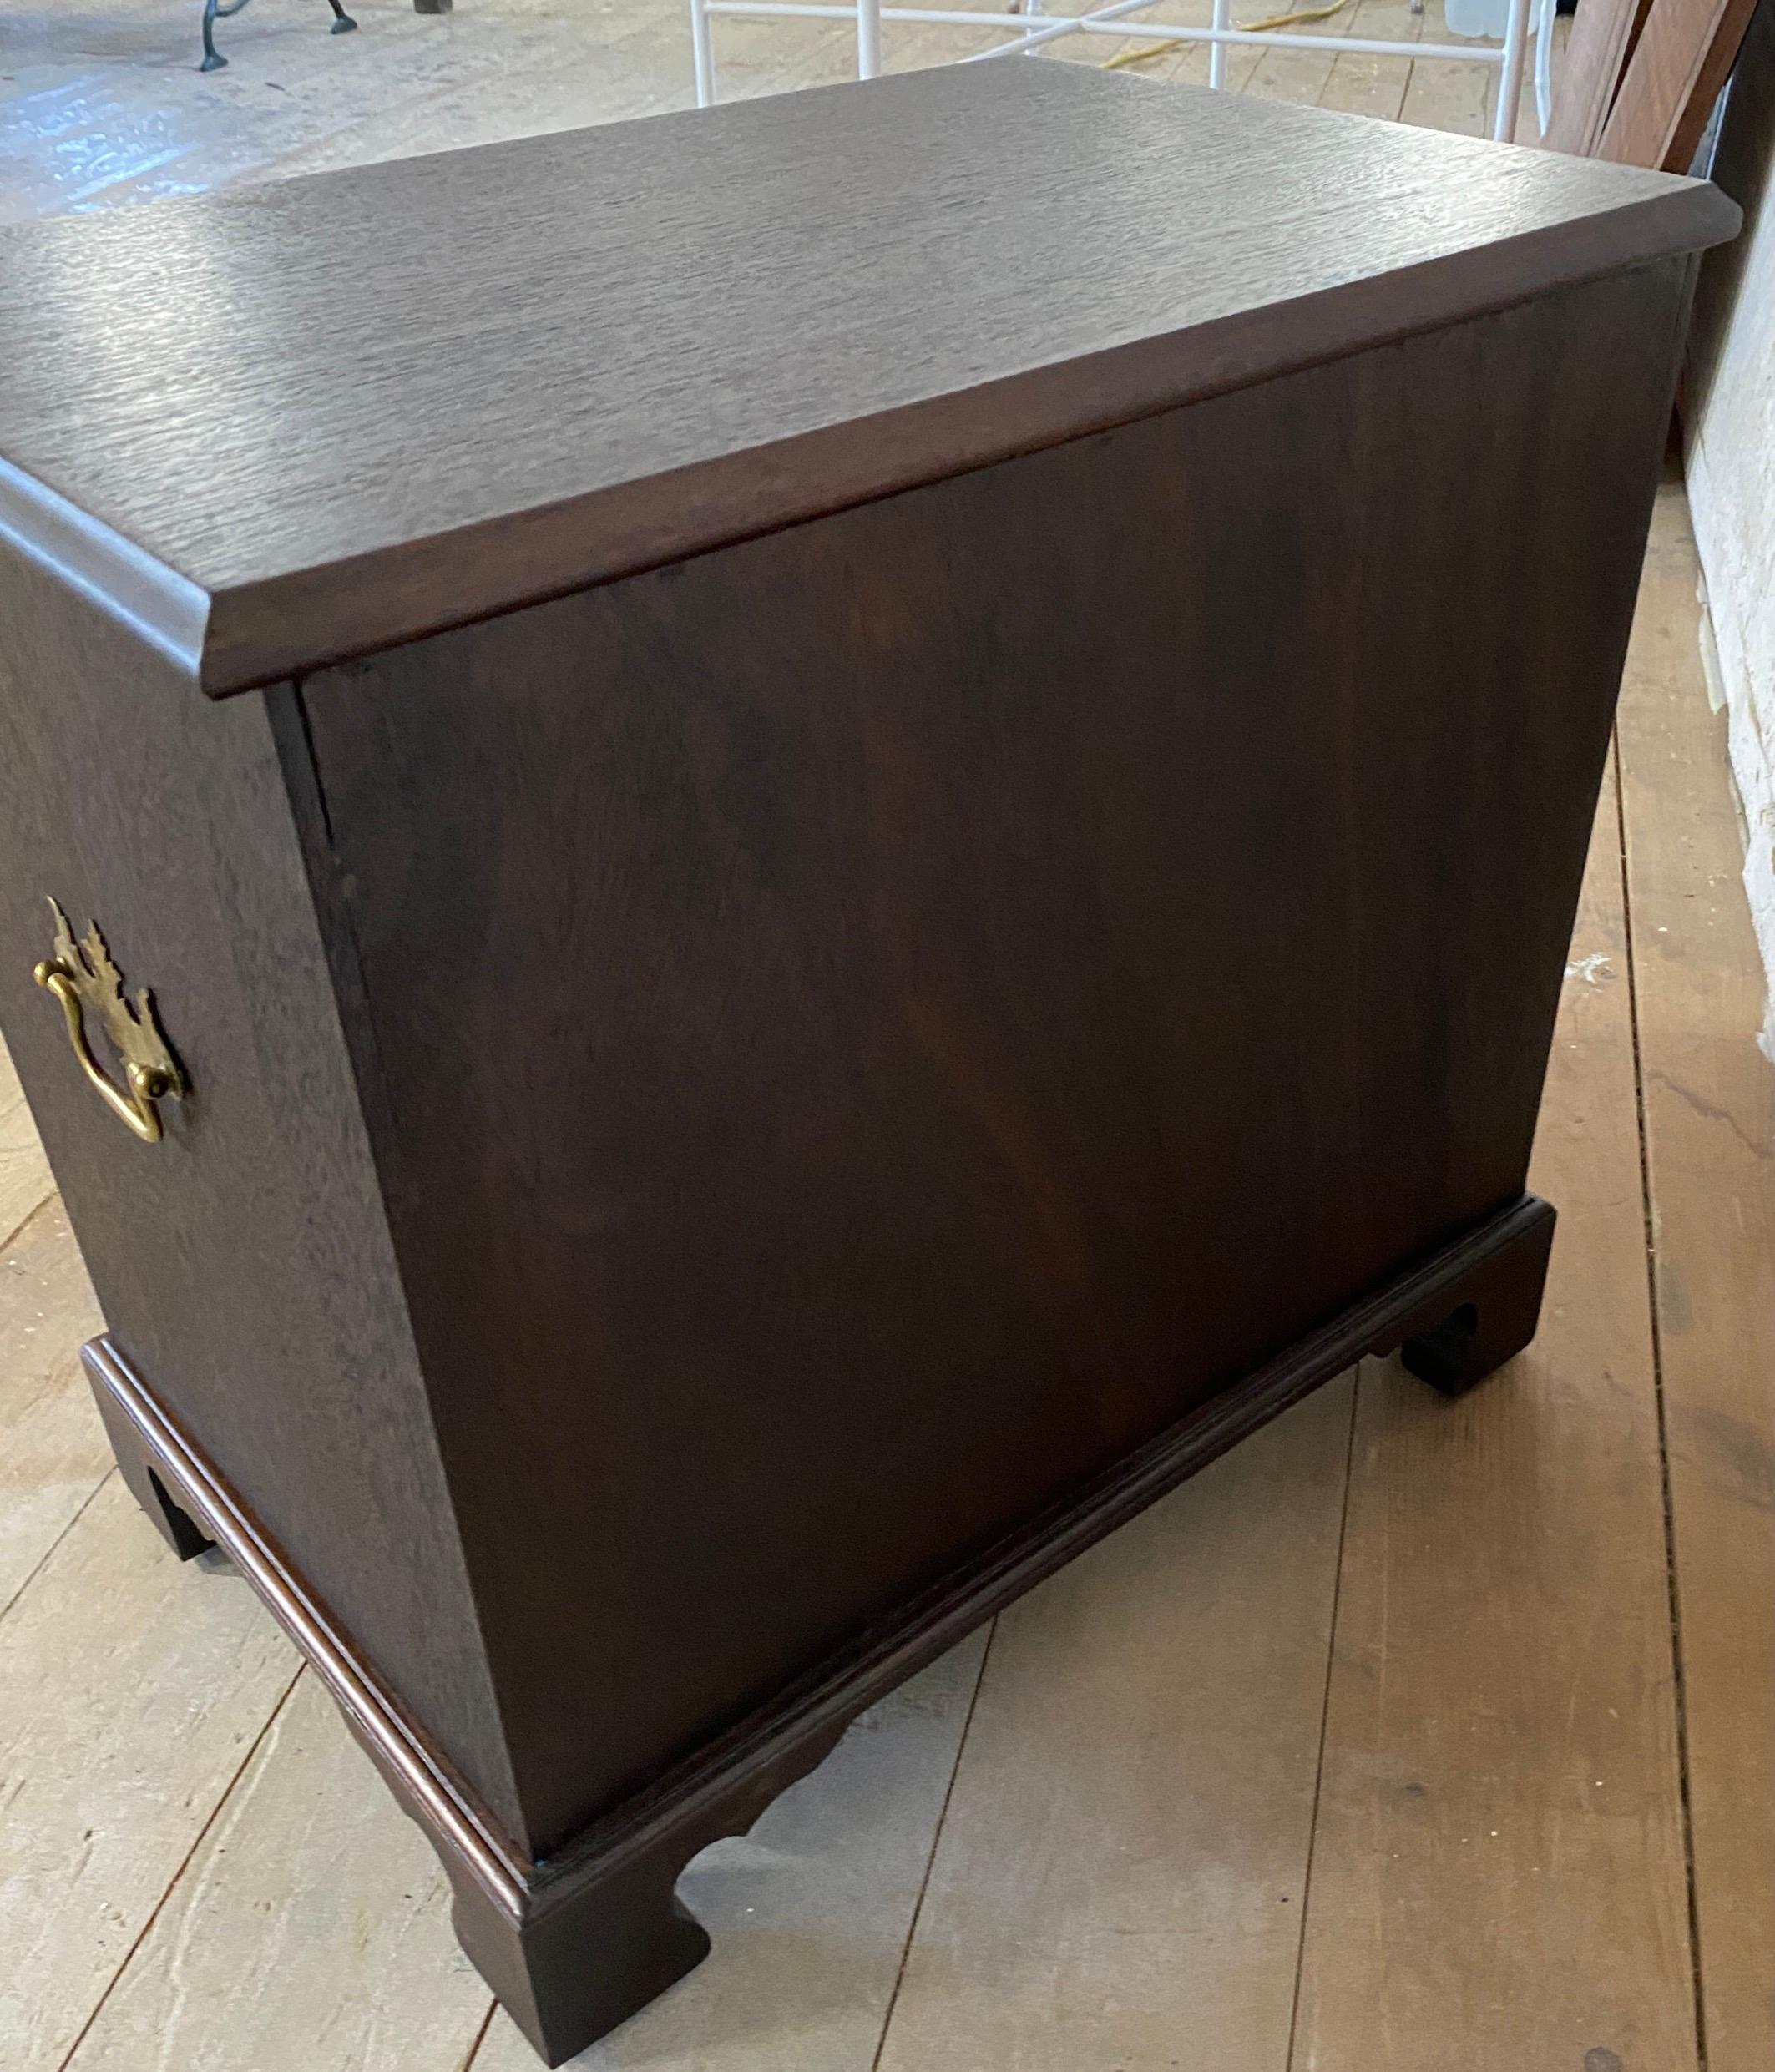 English George III Chippendale style small mahogany chest of drawers with plate handles. The chest has three dovetail drawers on bracket feet.
This functional little chest is a great size, small enough to be useful anywhere.